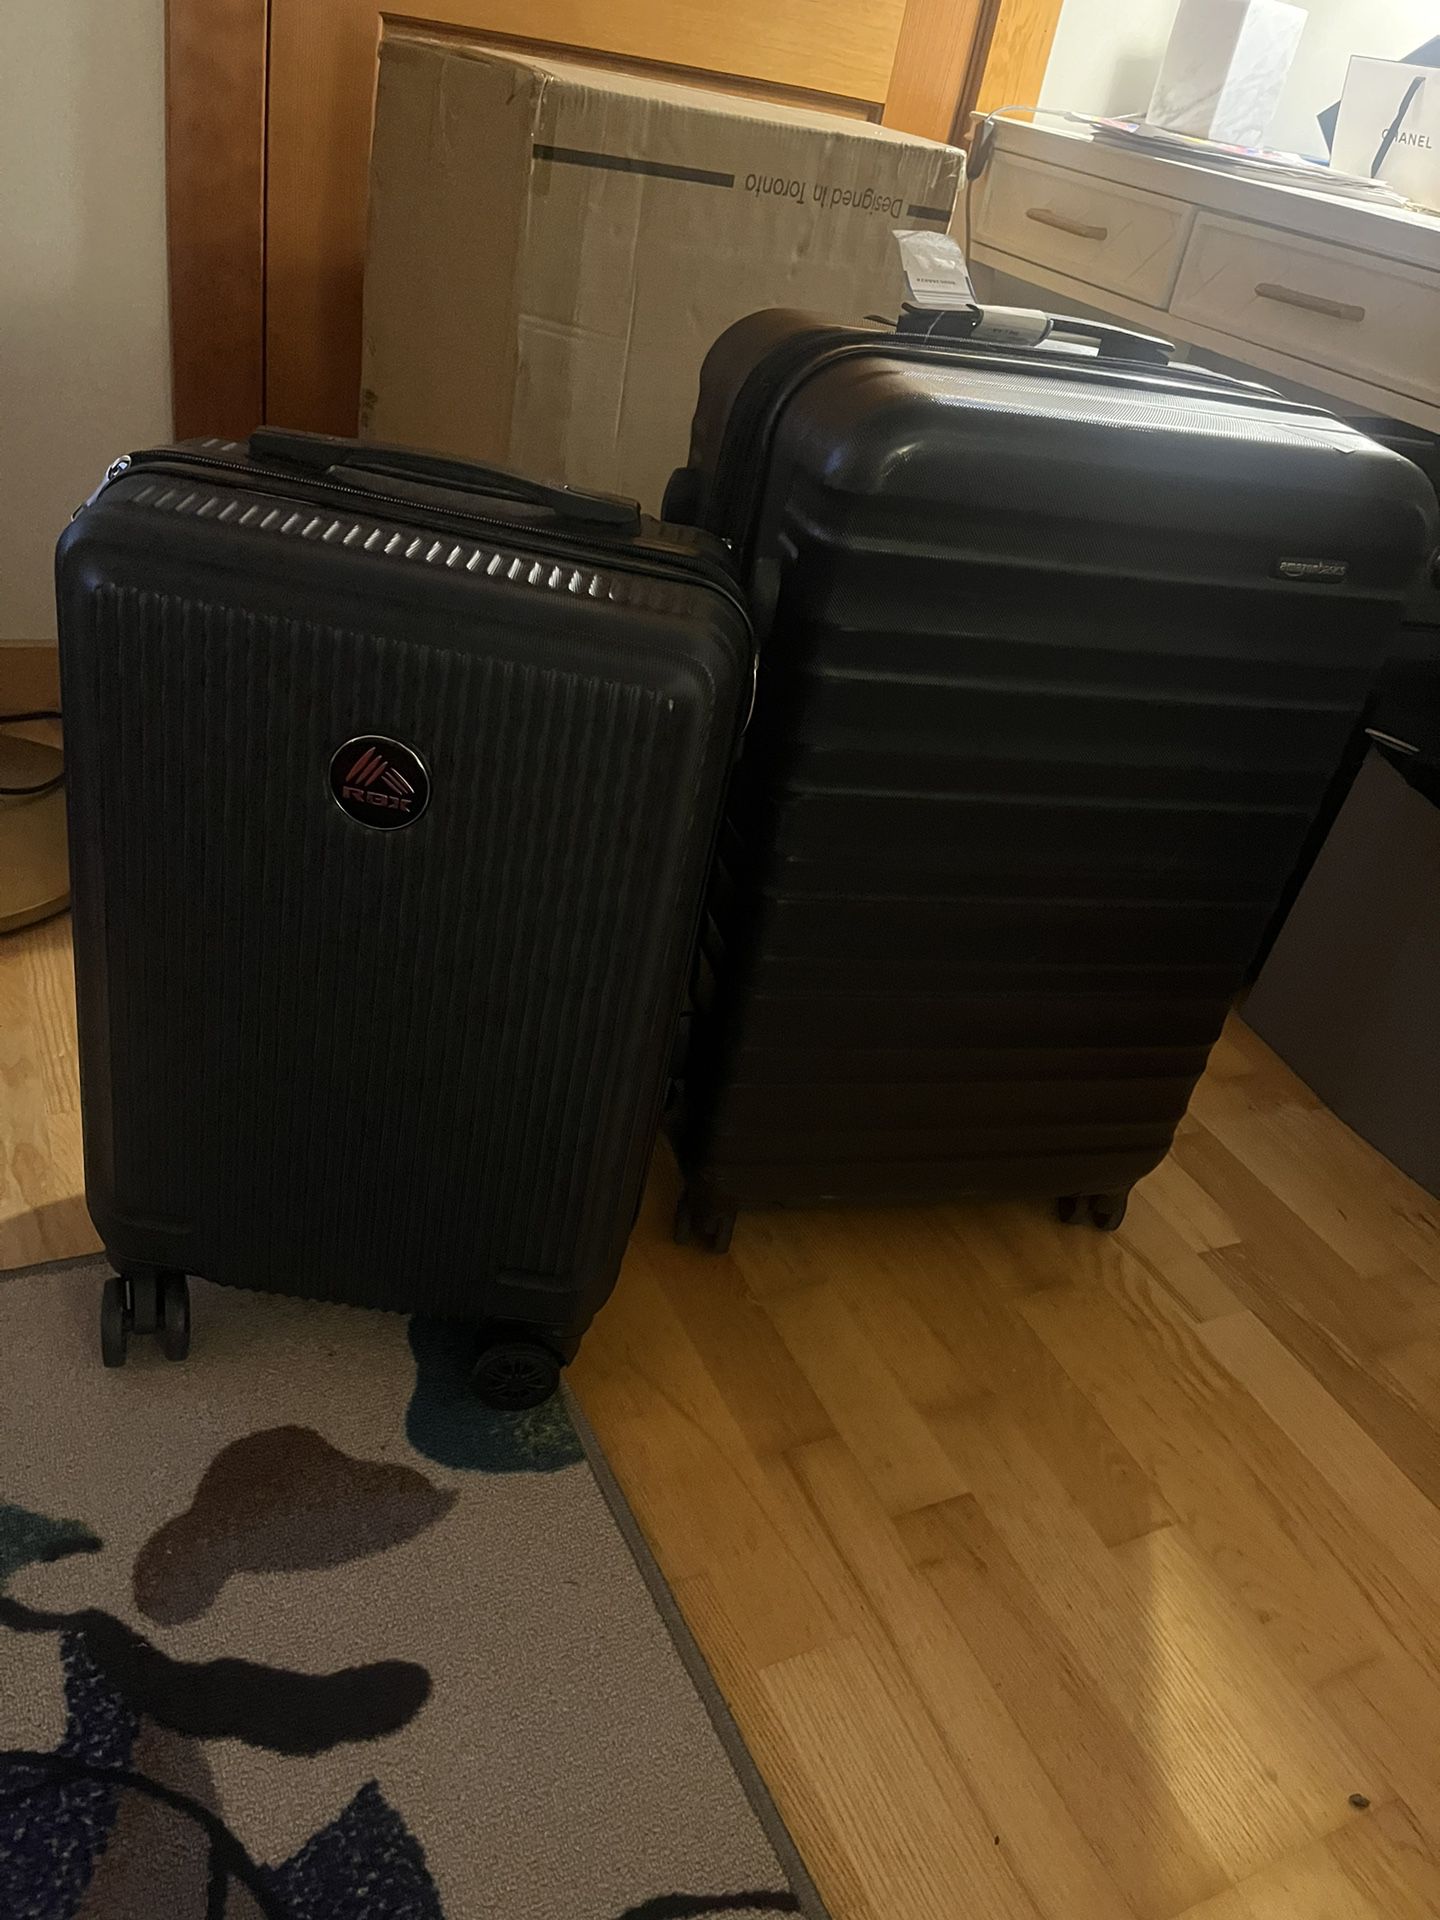 2 Black Suitcases (carry on + check in)